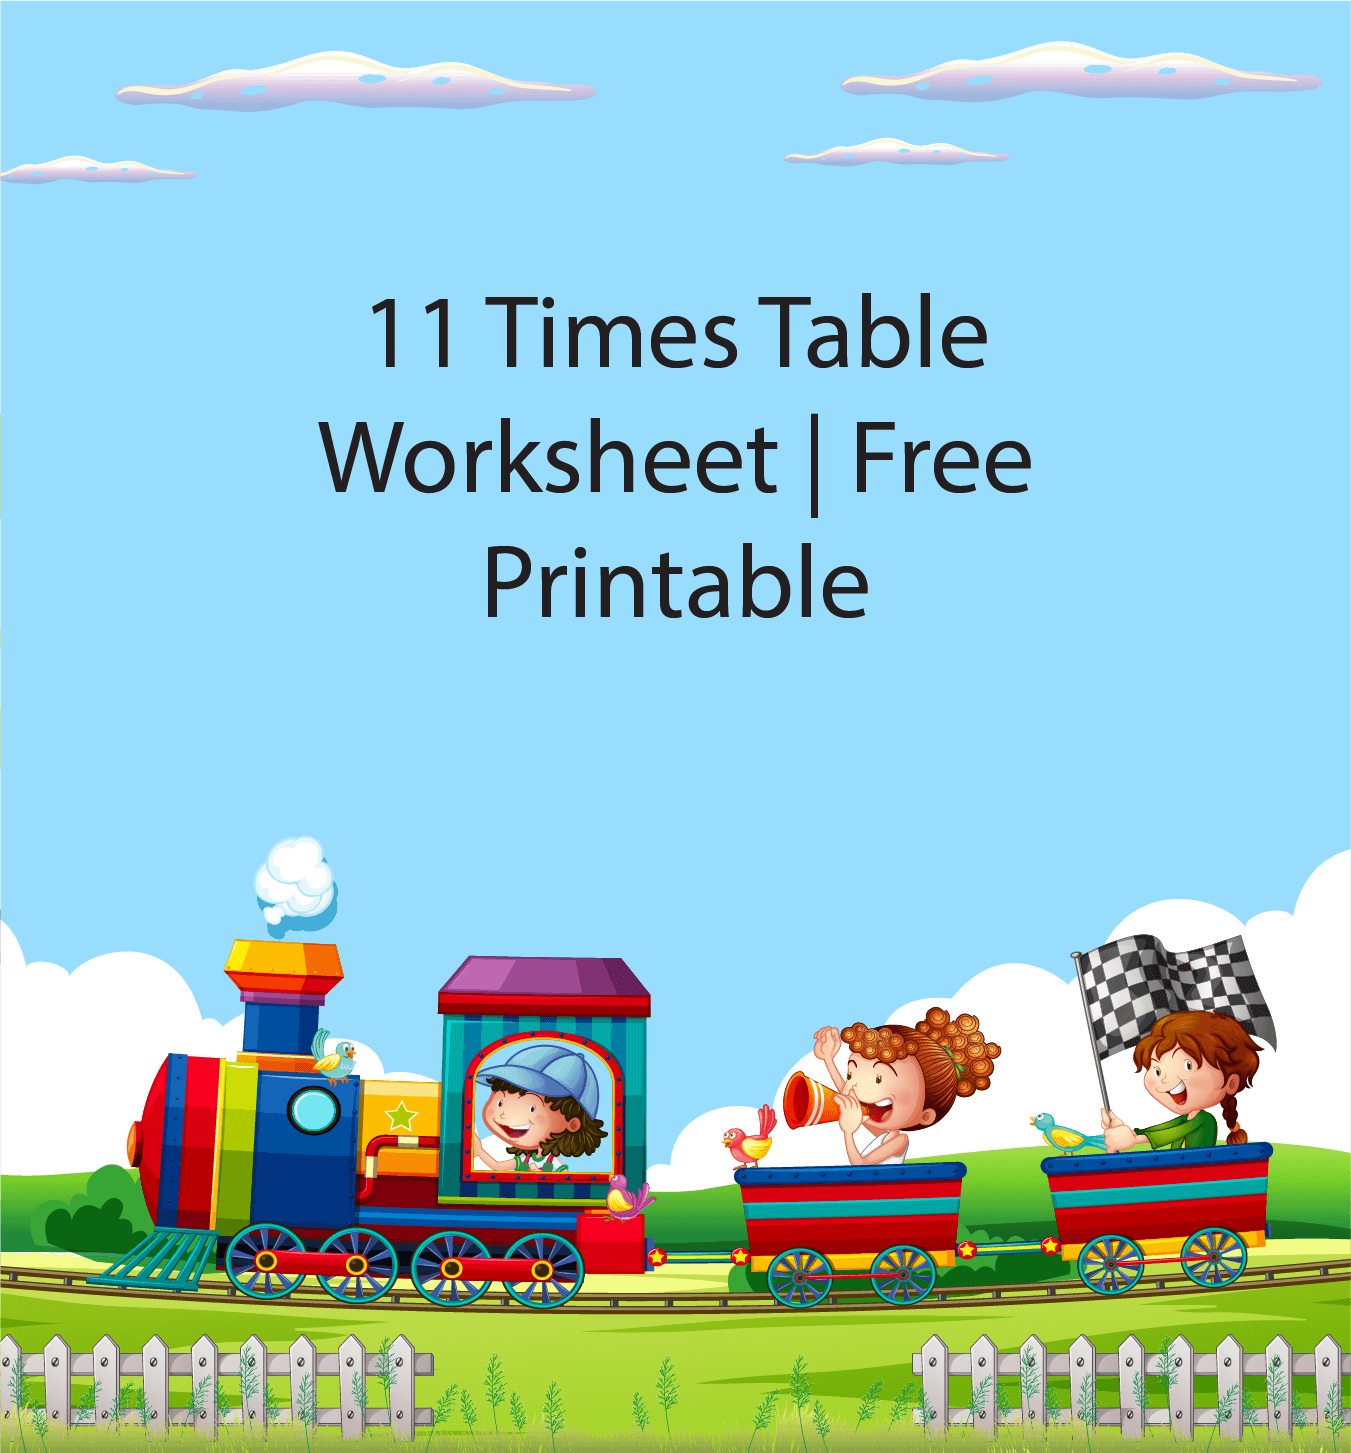 10 Free 11 Times Table Worksheet | Fun Learning